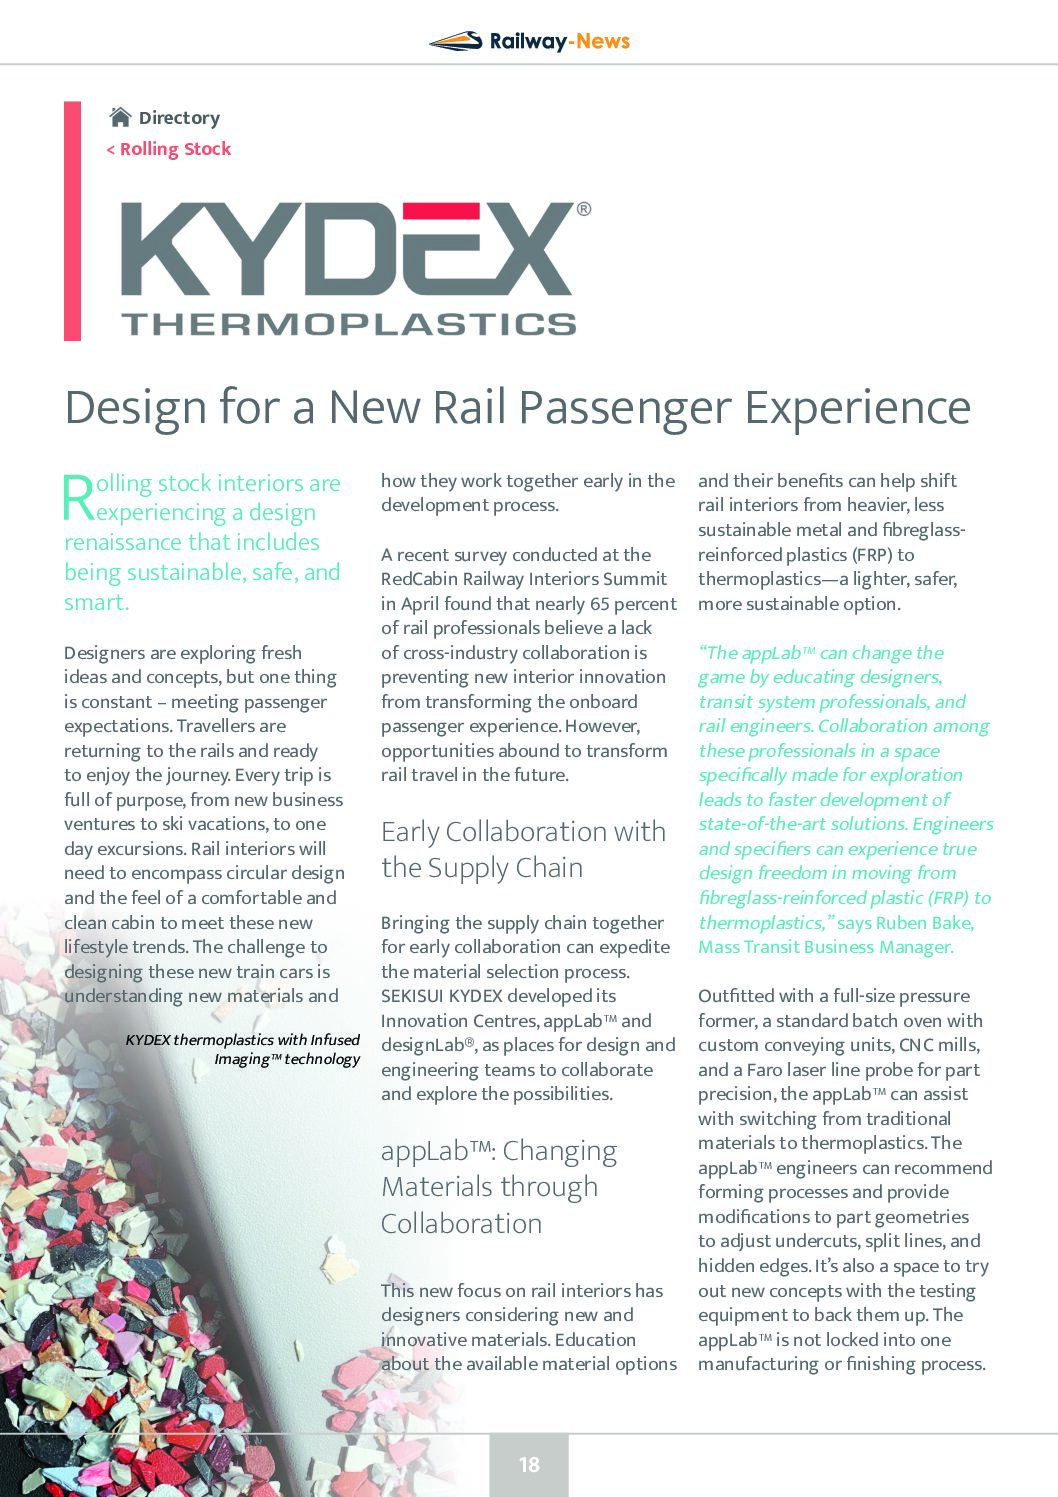 SEKISUI KYDEX: Design for a New Rail Passenger Experience